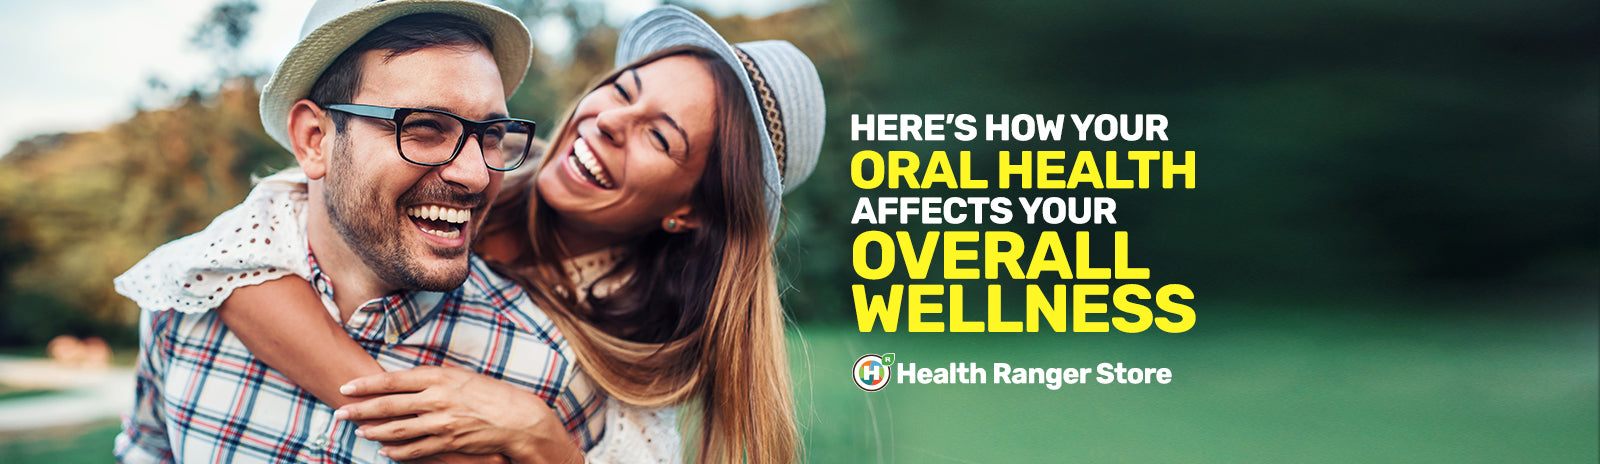 Here’s how your oral health affects your overall wellness